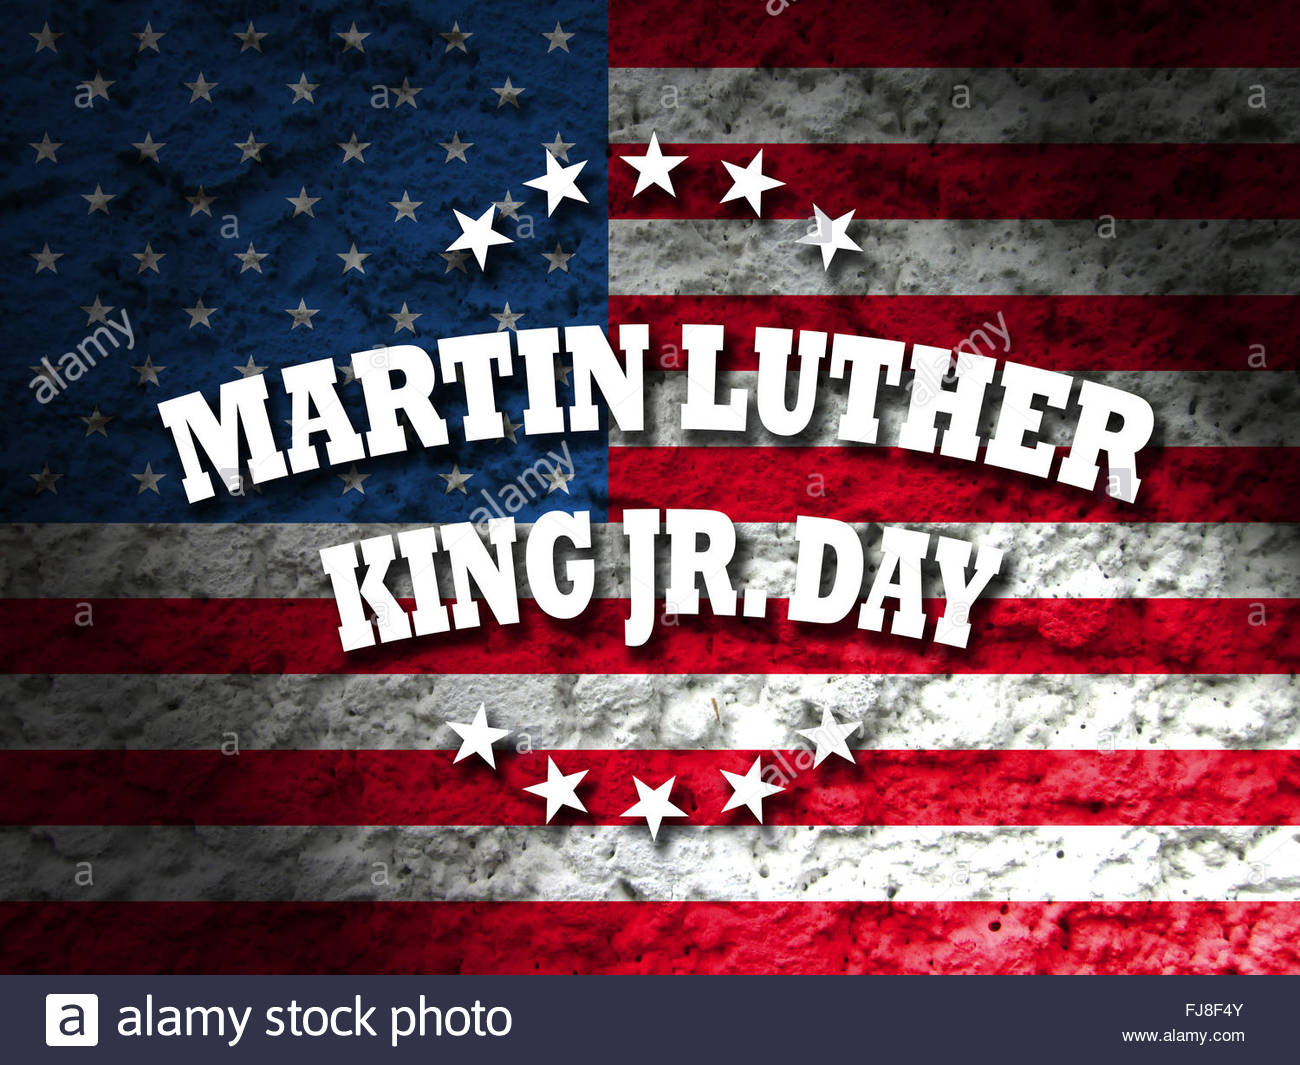 Martin Luther King Jr Day Card With American Flag Grunge